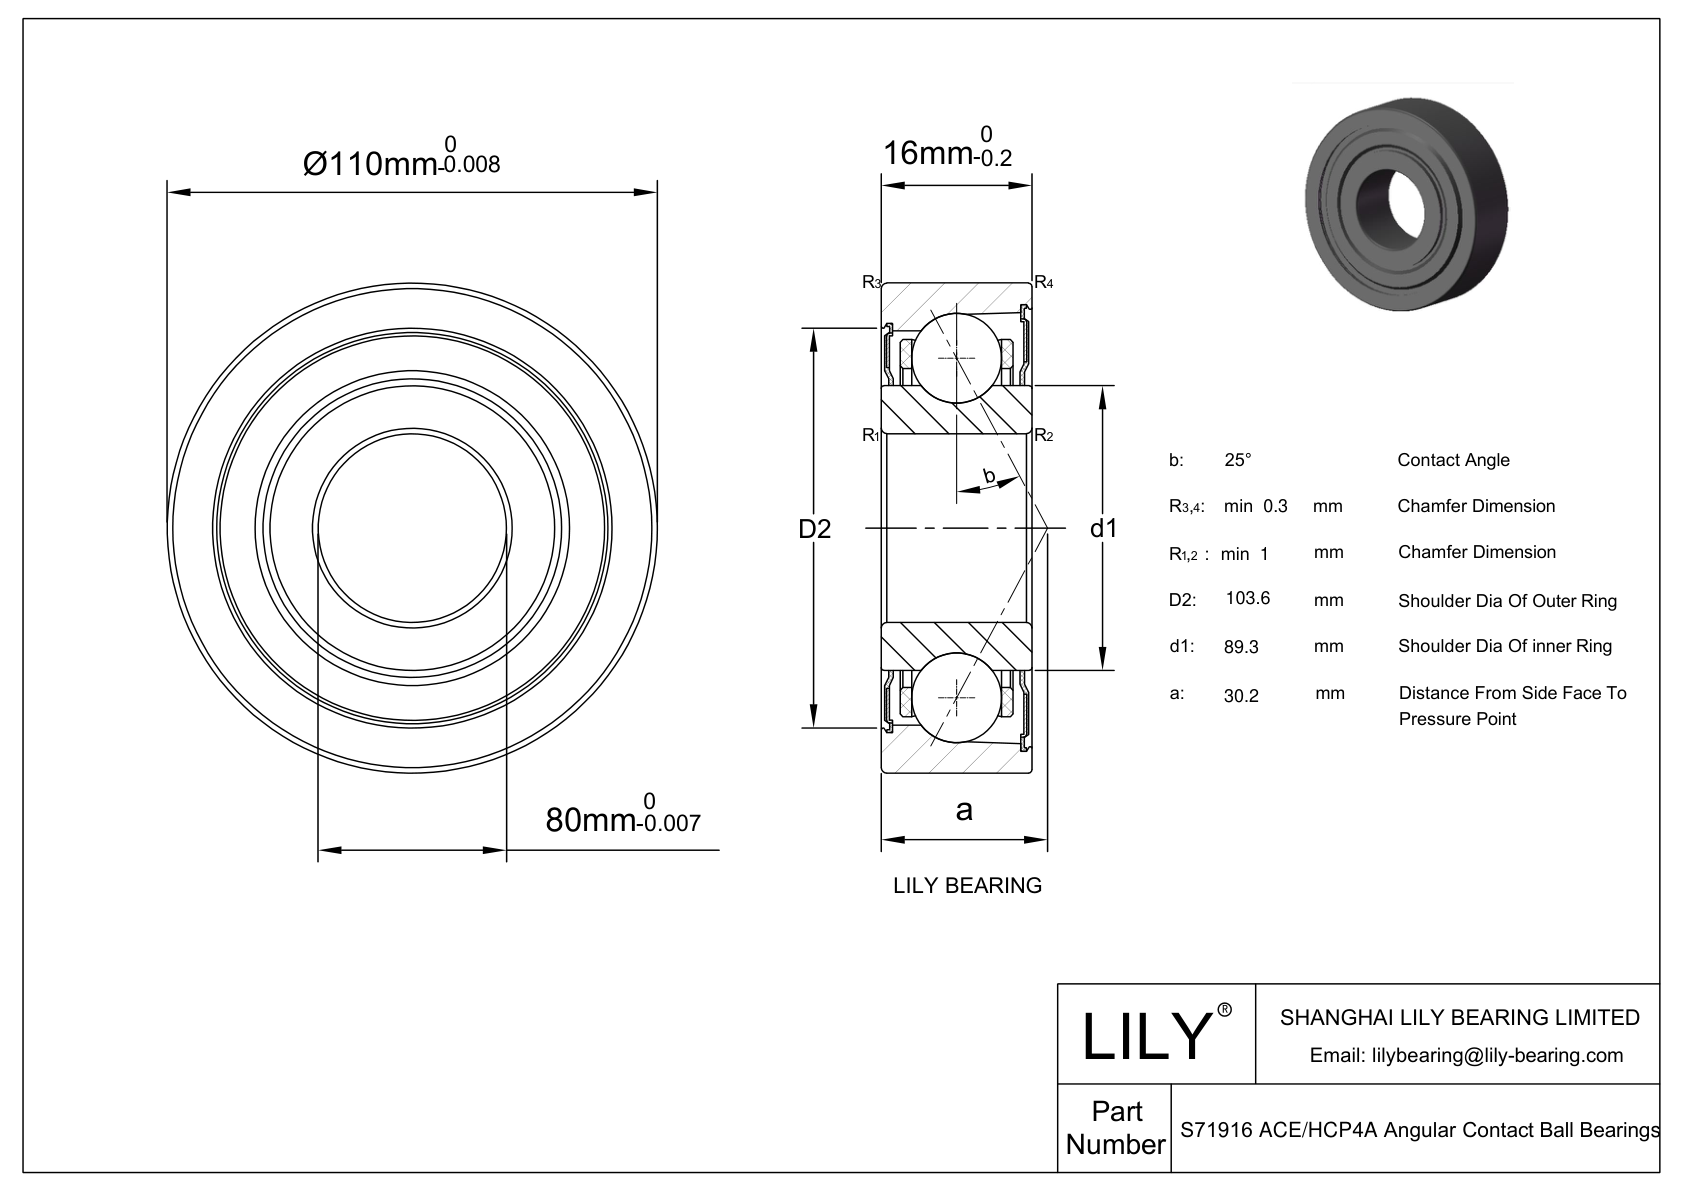 S71916 ACE/HCP4A Super Precision Angular Contact Ball Bearings cad drawing